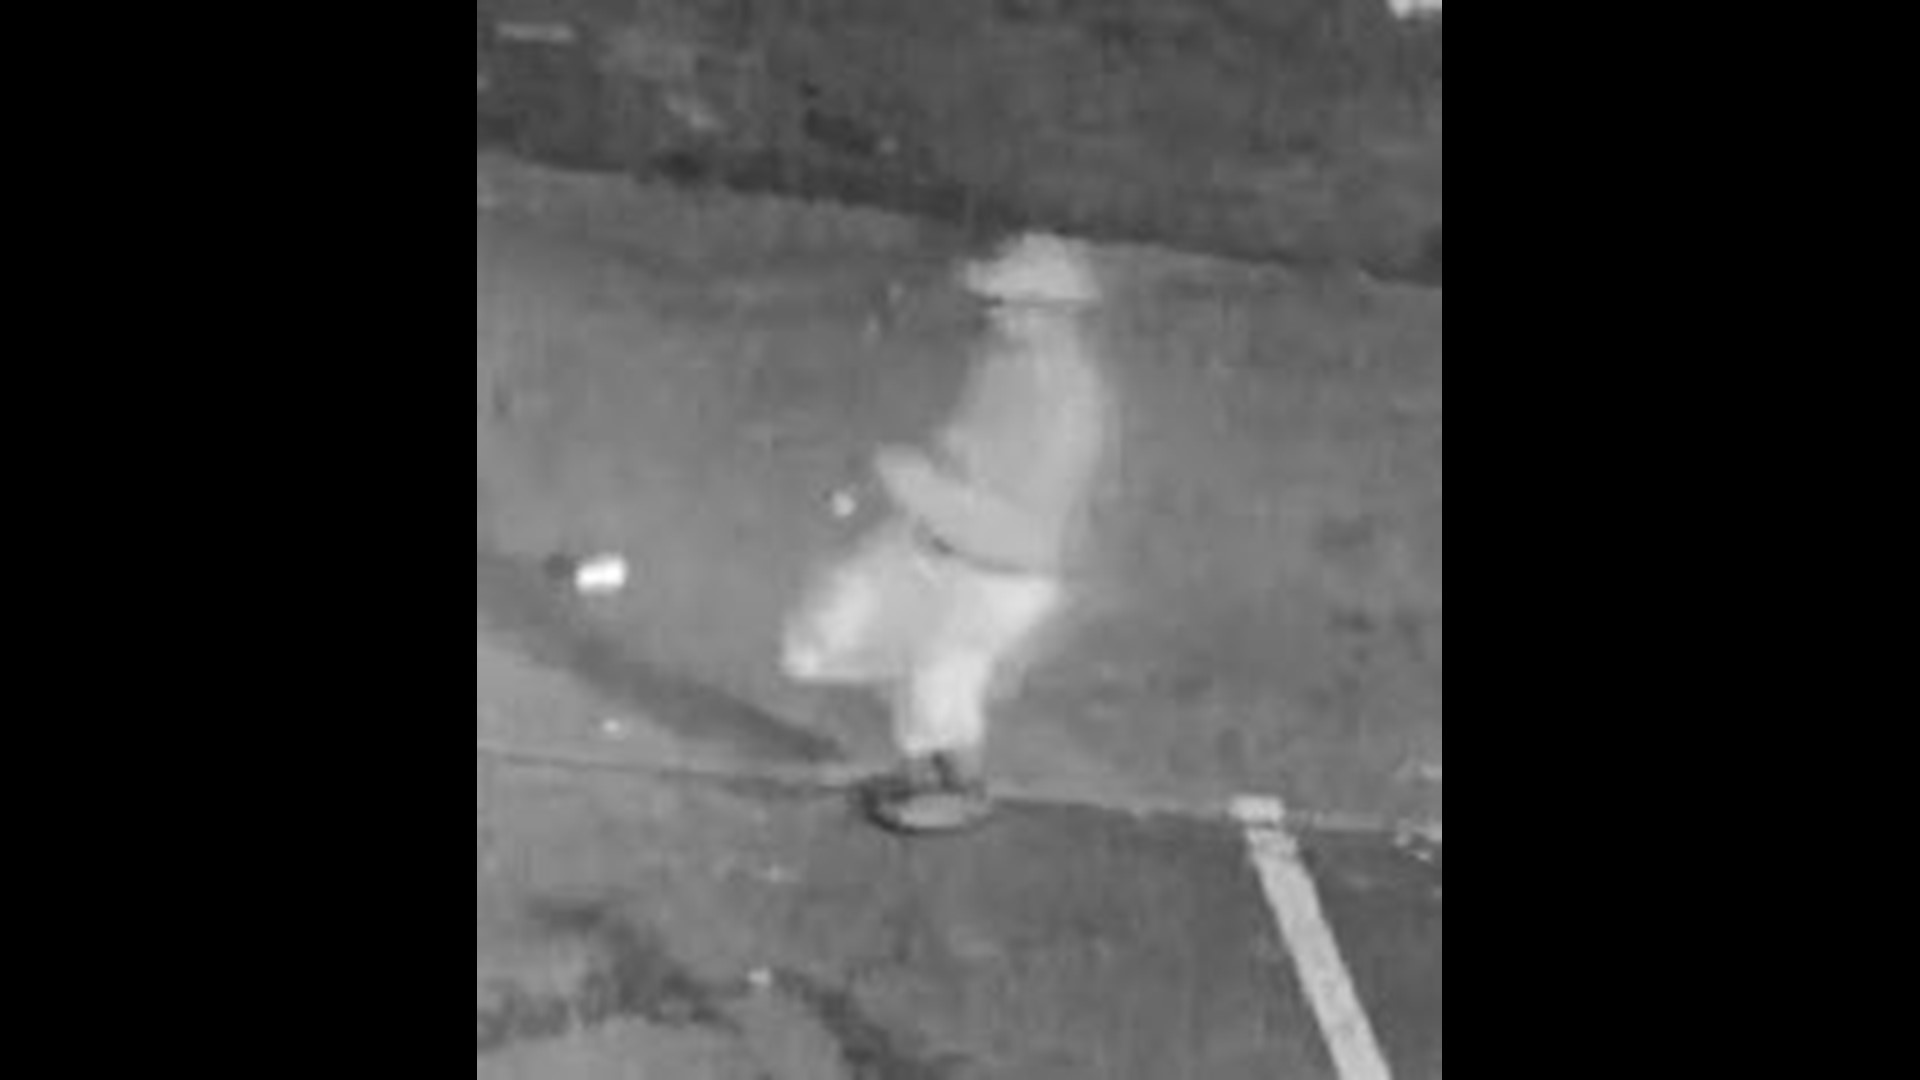 Police Searching For Man Who Sexually Assaulted Woman At Knife Point In Woodbridge 4366